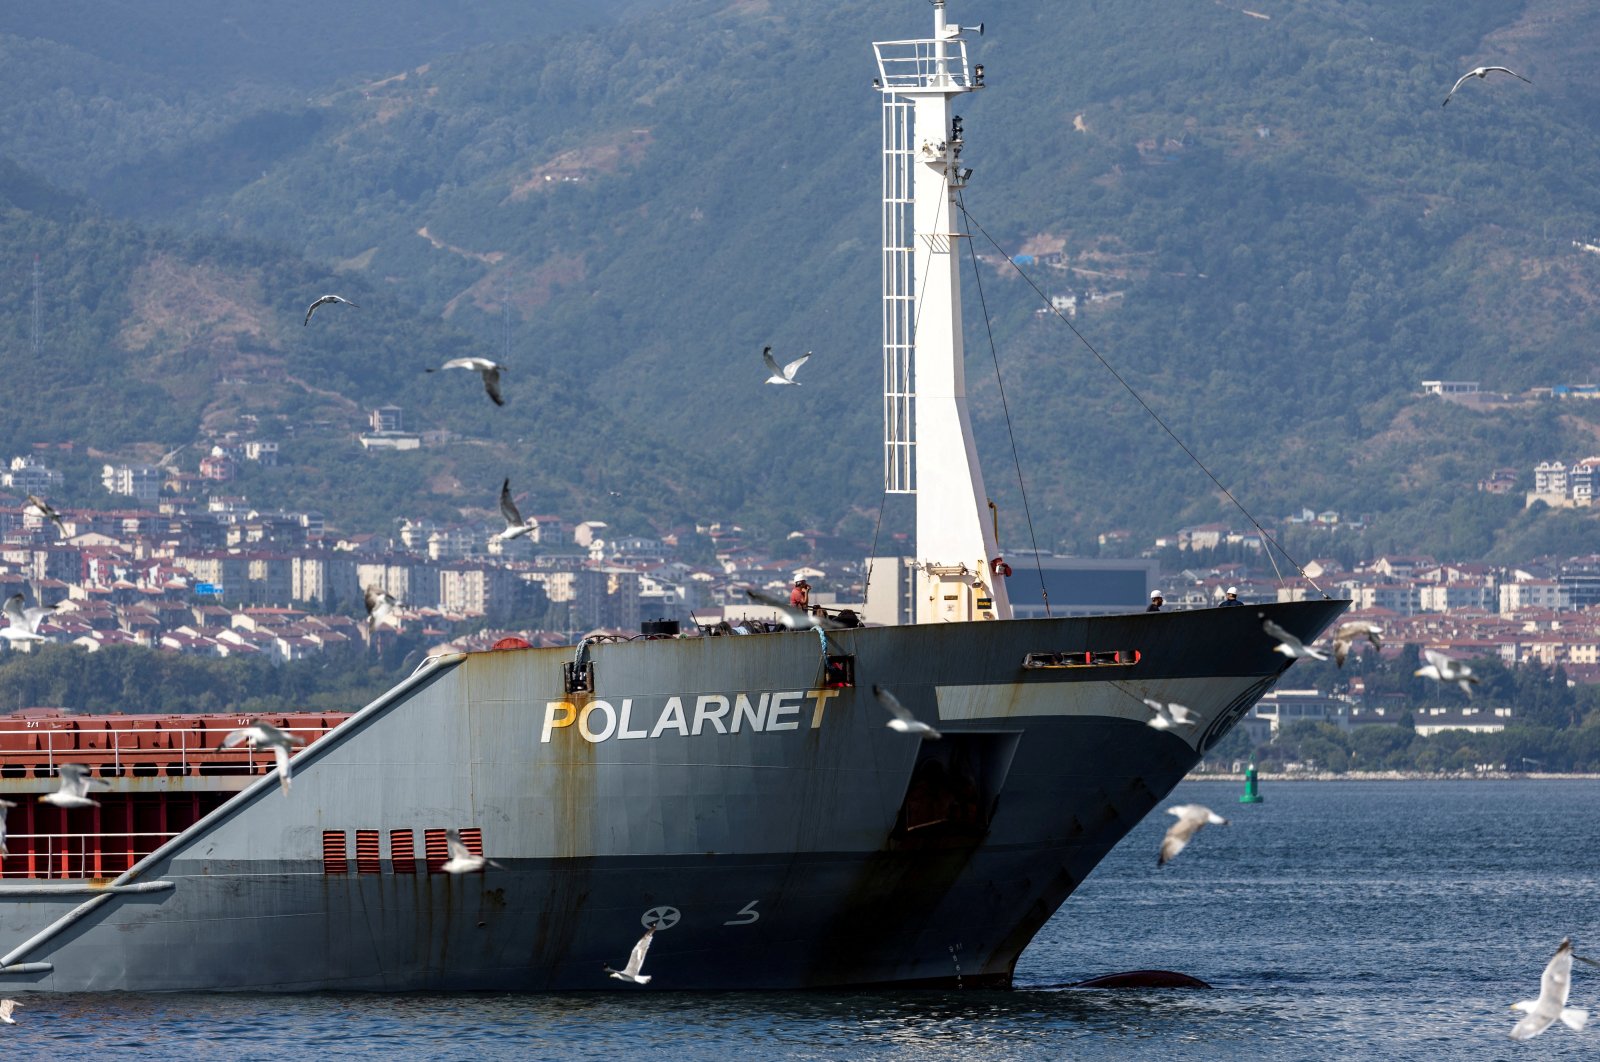 The Turkish-flagged cargo ship Polarnet, carrying Ukrainian grain, approaches its final destination, marking the completion of the first shipment since the exports were relaunched from Ukraine, at Safiport Derince in the gulf of İzmit in Kocaeli province, northwestern Türkiye, Aug. 8, 2022. (Reuters Photo)